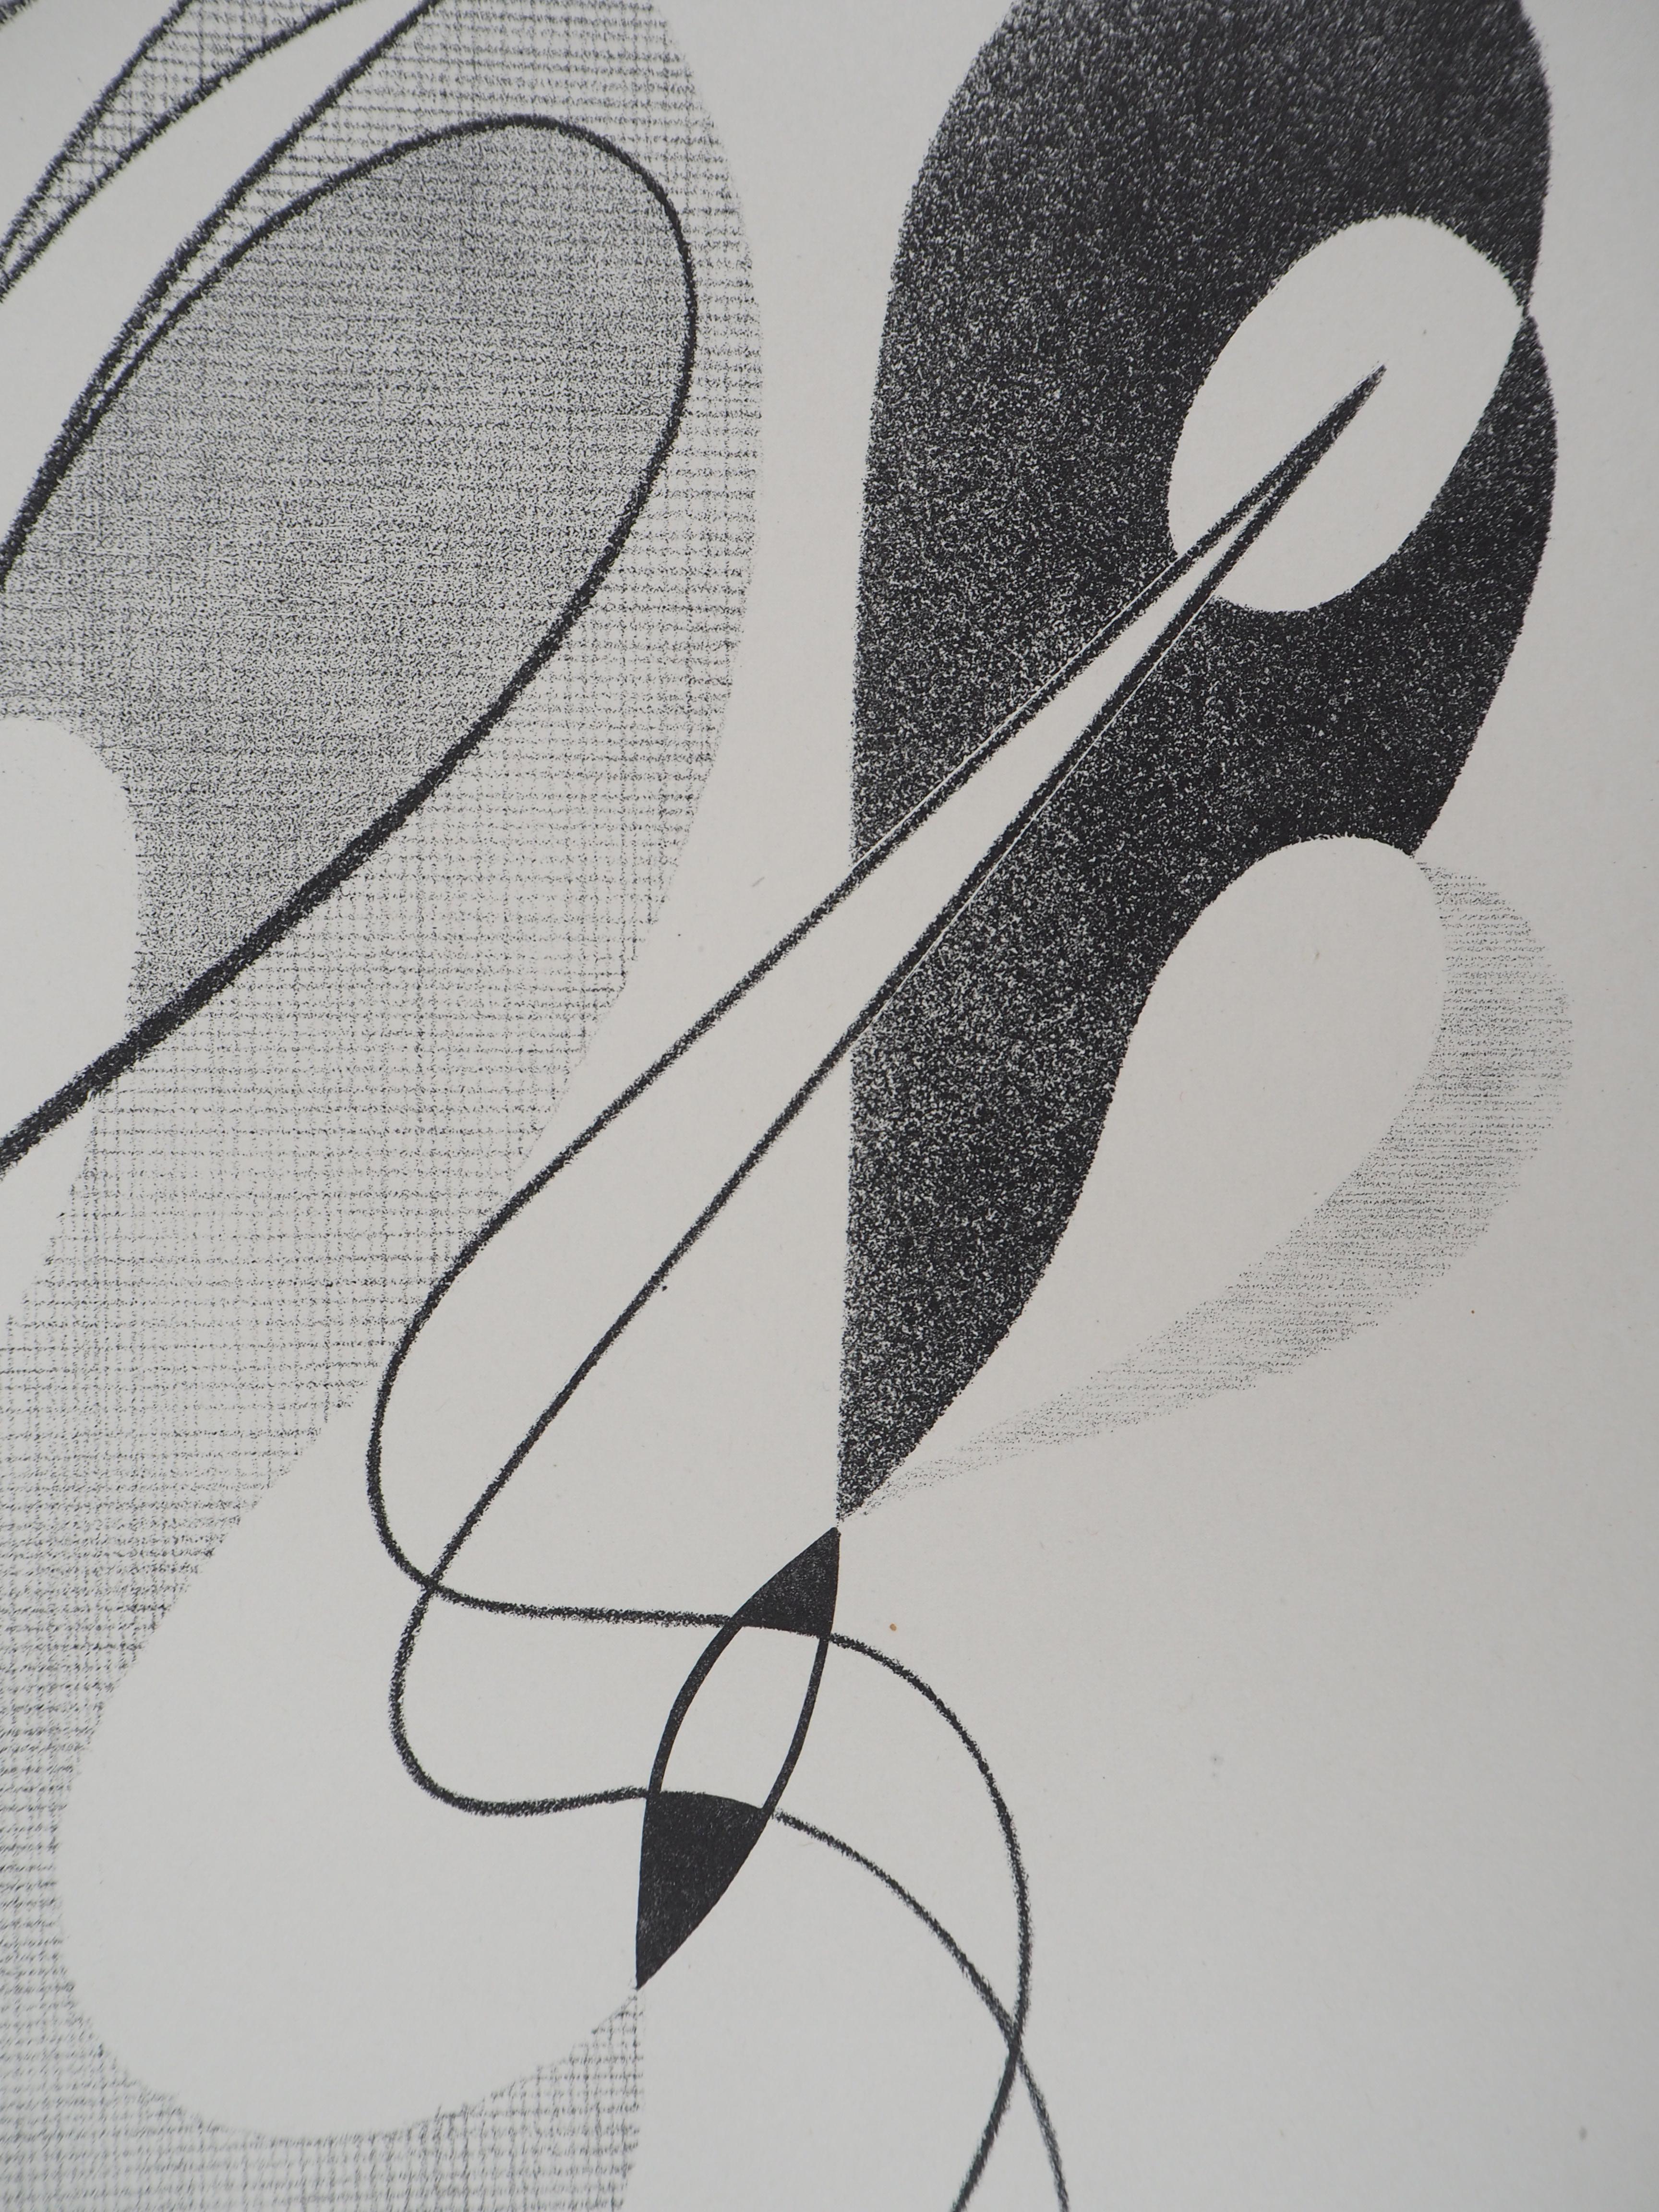 Abstract Composition - Original lithograph, Handsigned and Numbered / 100, 1946 2